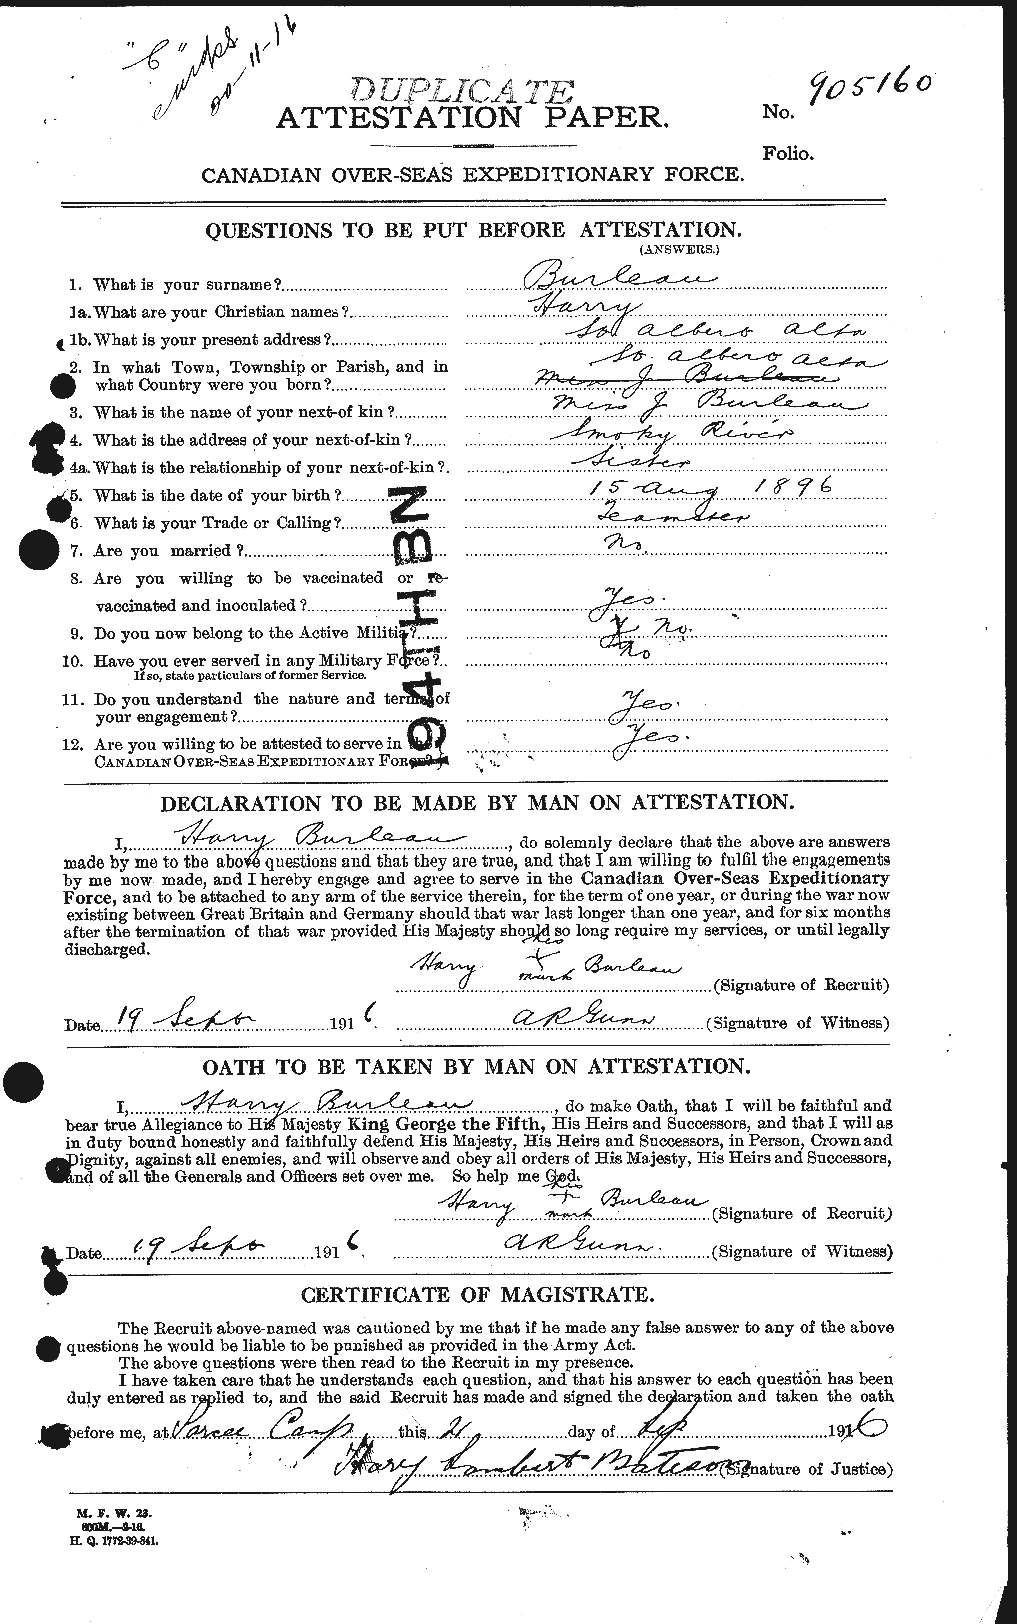 Personnel Records of the First World War - CEF 278637a